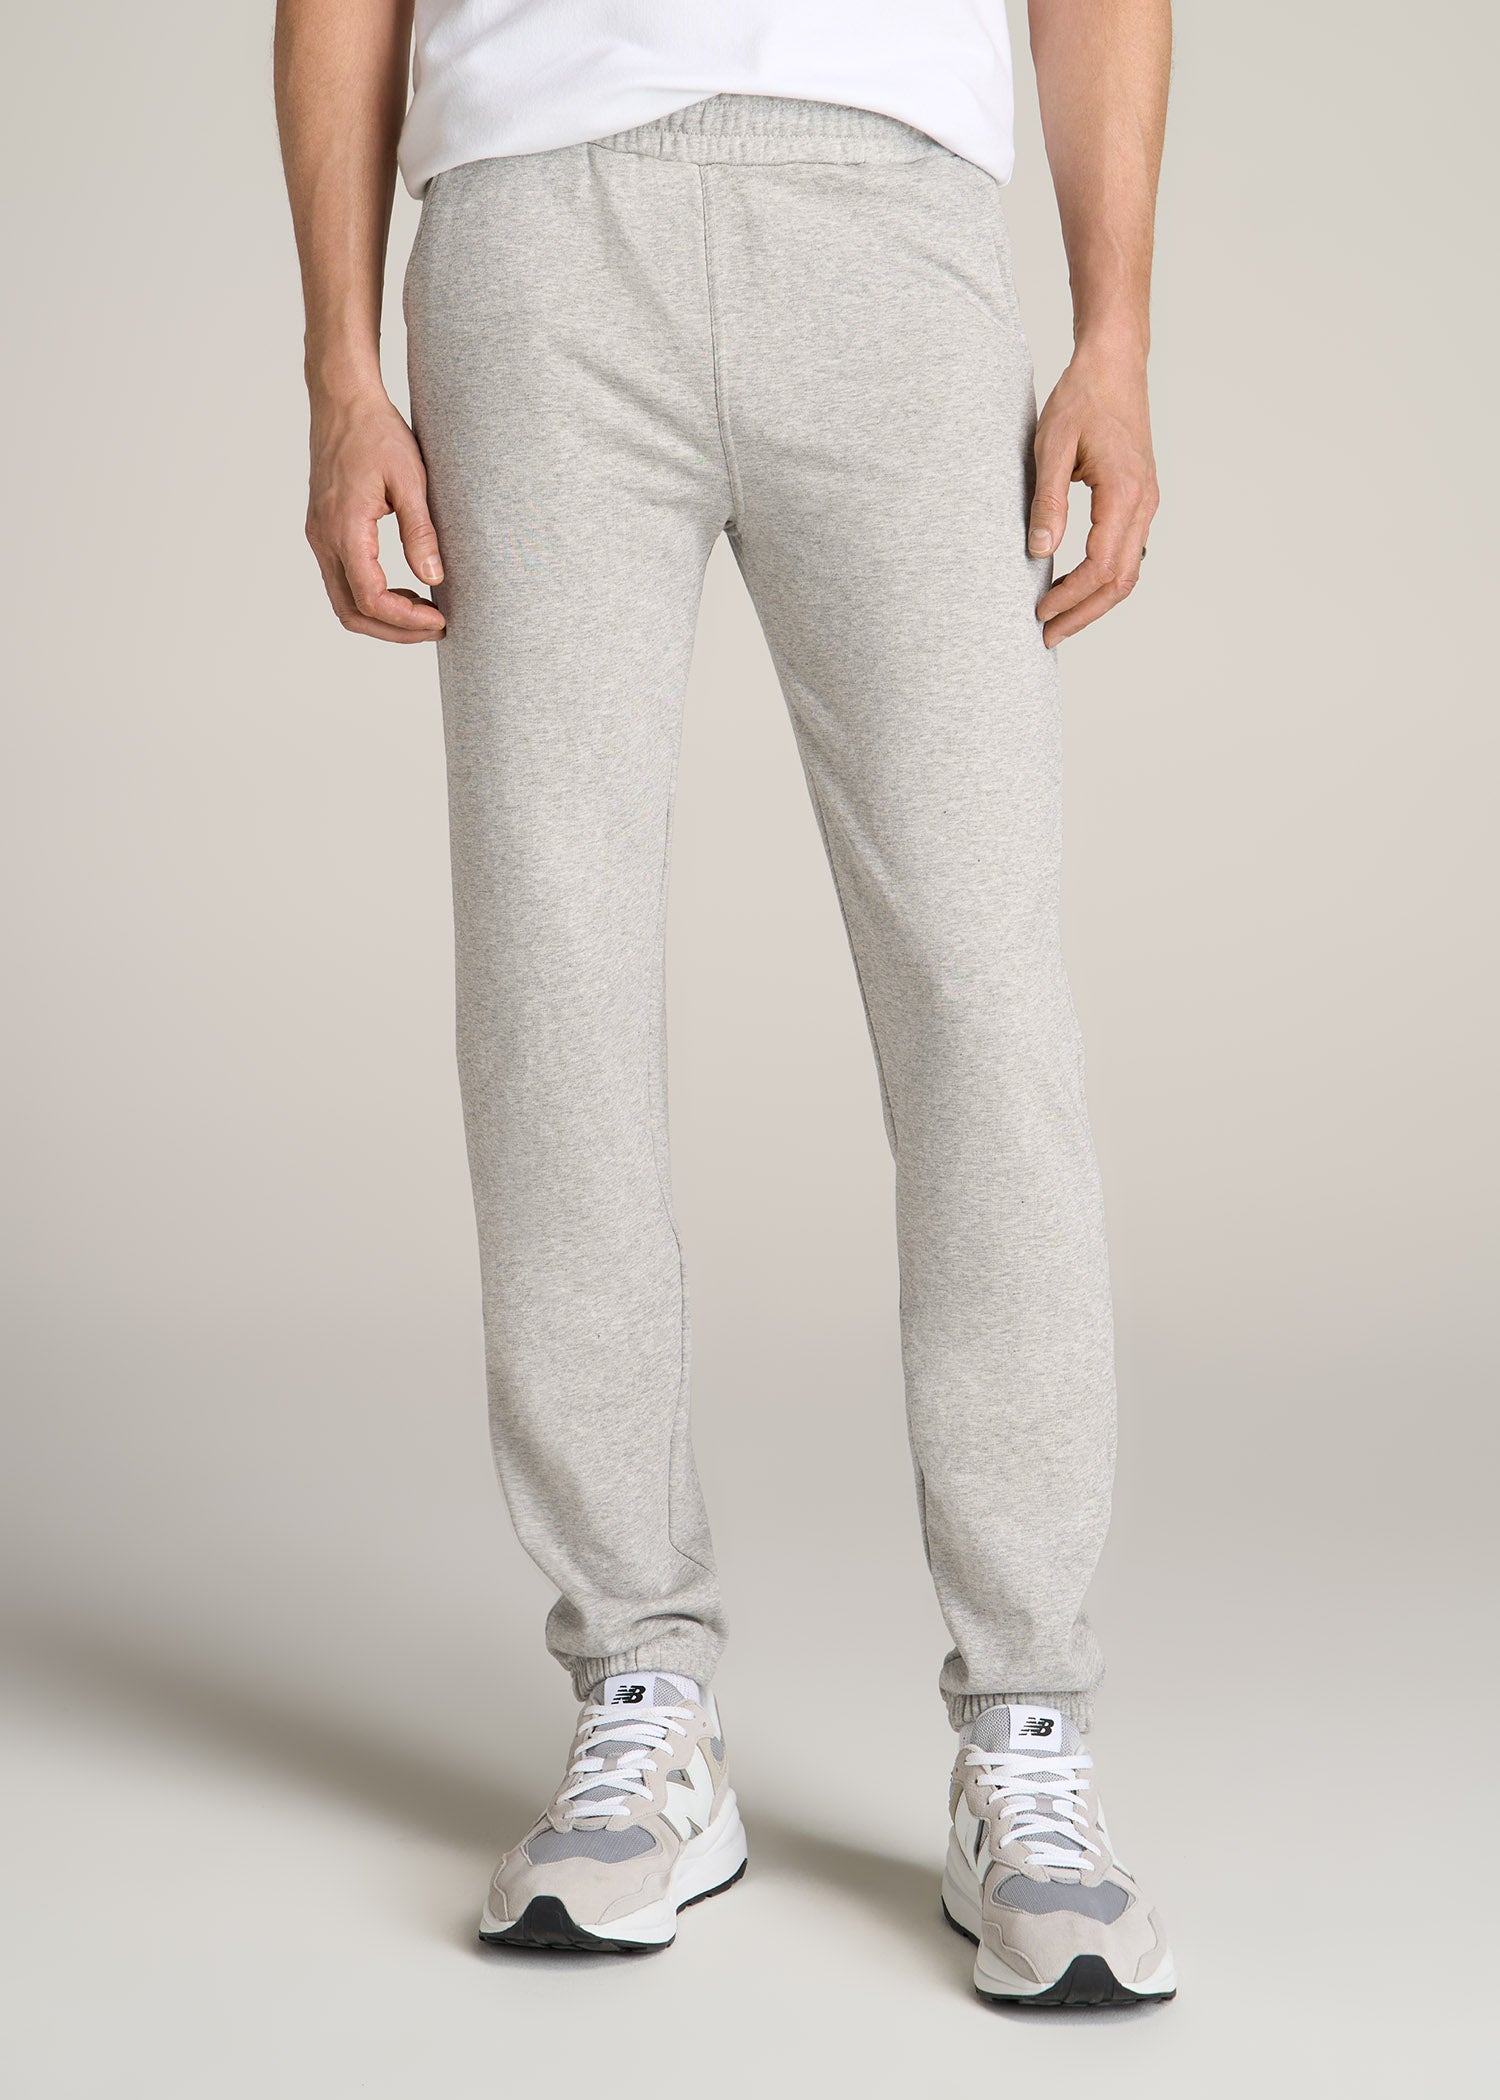 Wearever French Terry Sweatpants for Tall Men in Grey Mix